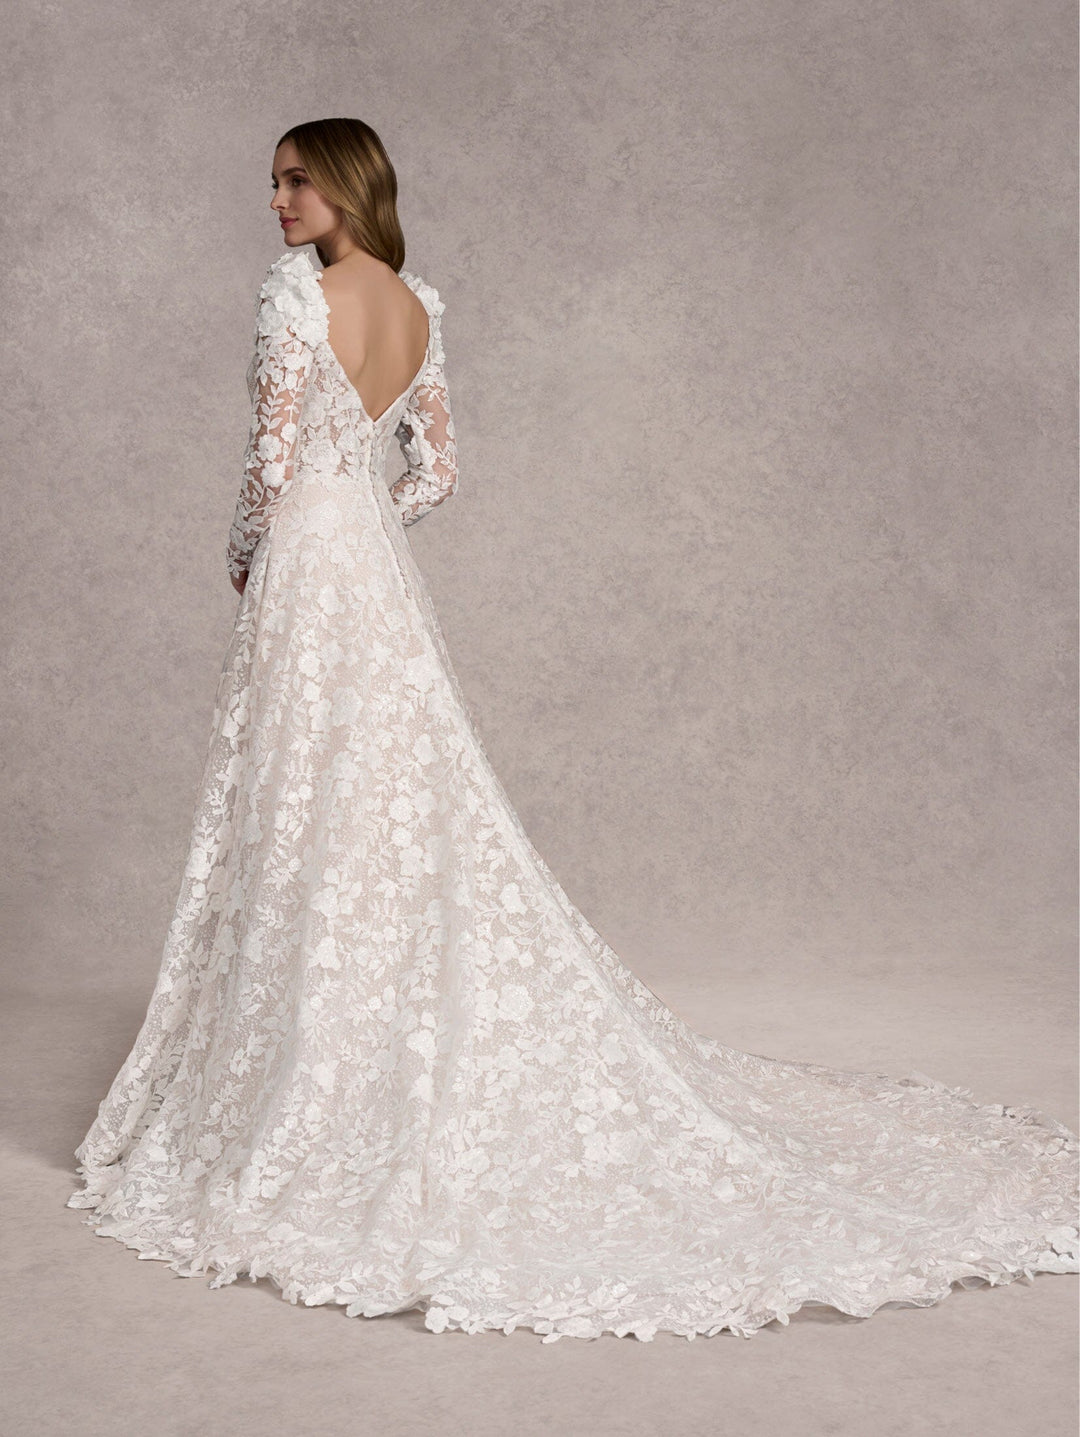 3D Floral Long Sleeve Wedding Gown by Adrianna Papell 31270